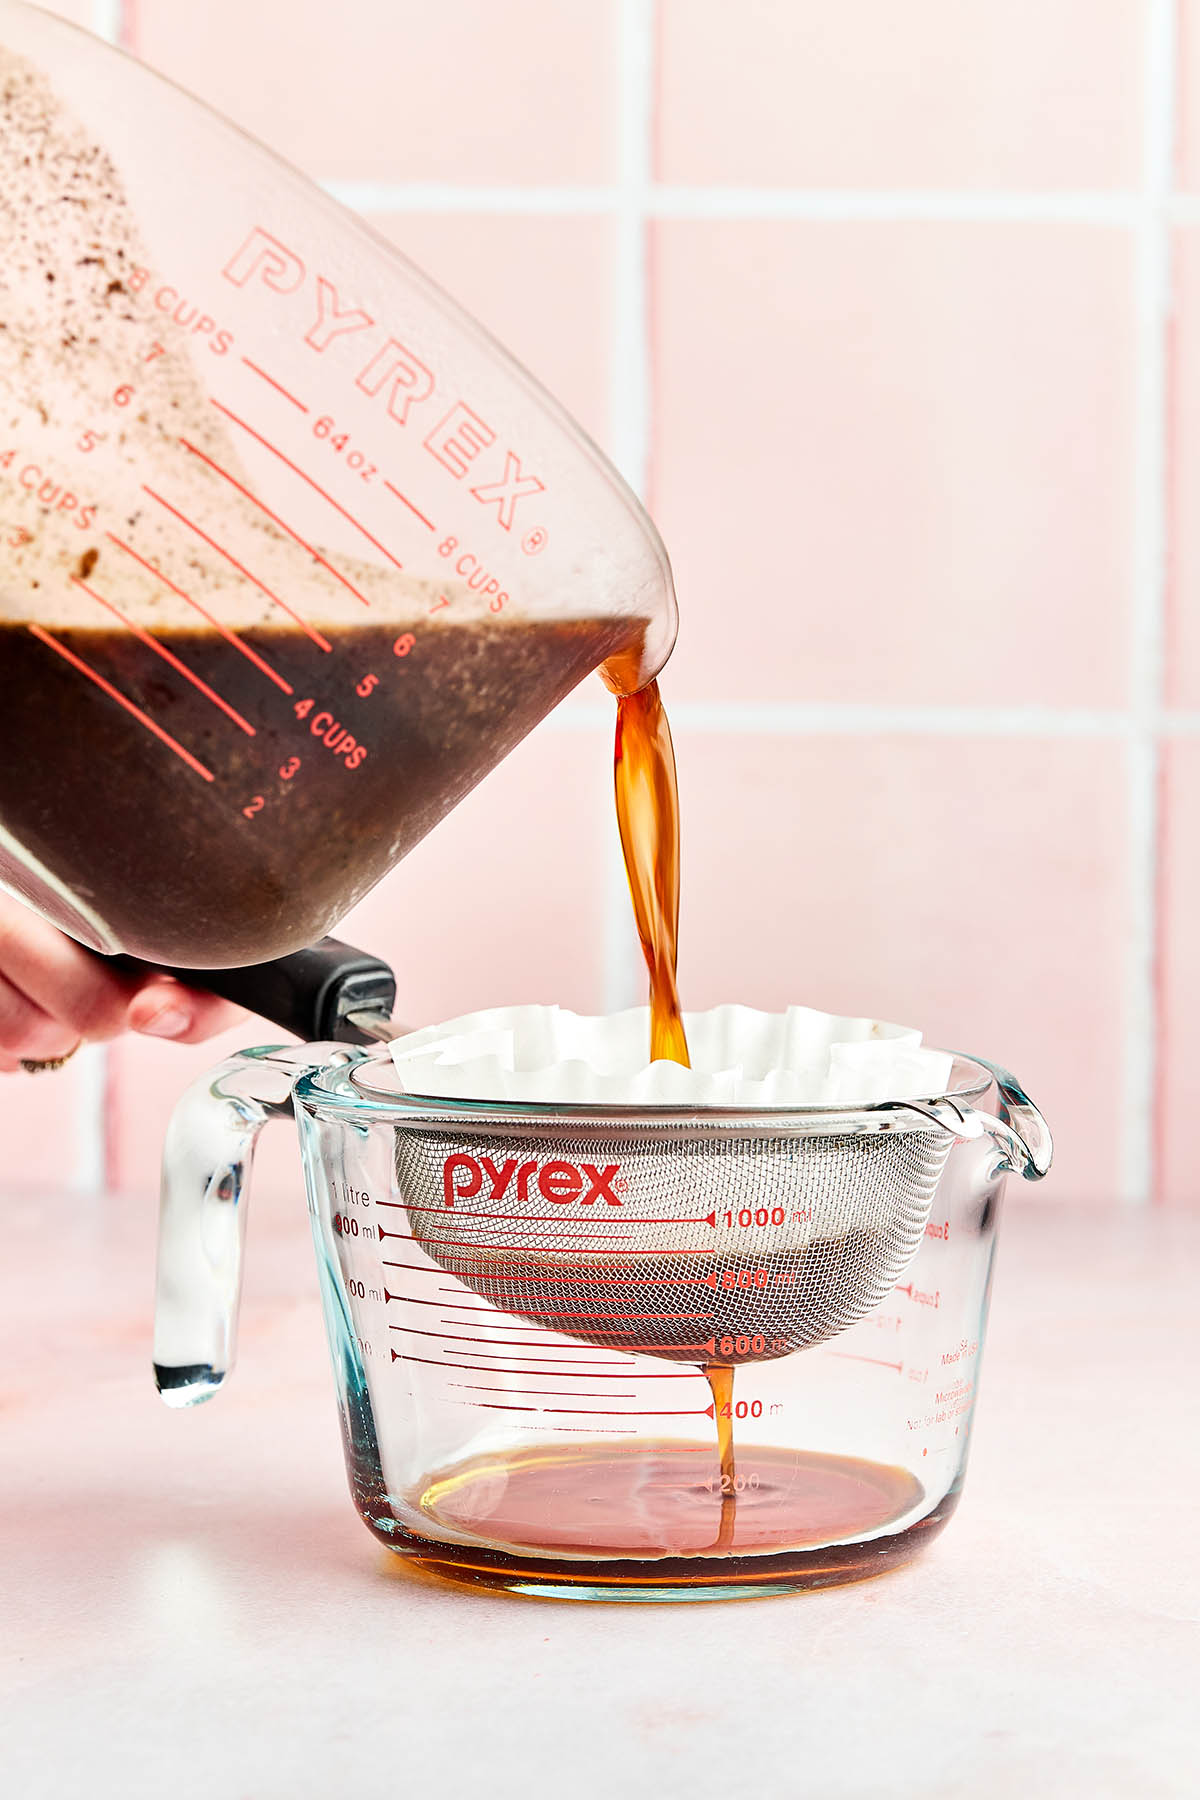 Coffee concentrate being poured from a measuring cup into another measuring cup through a fine mesh strainer lined with a coffee filter.